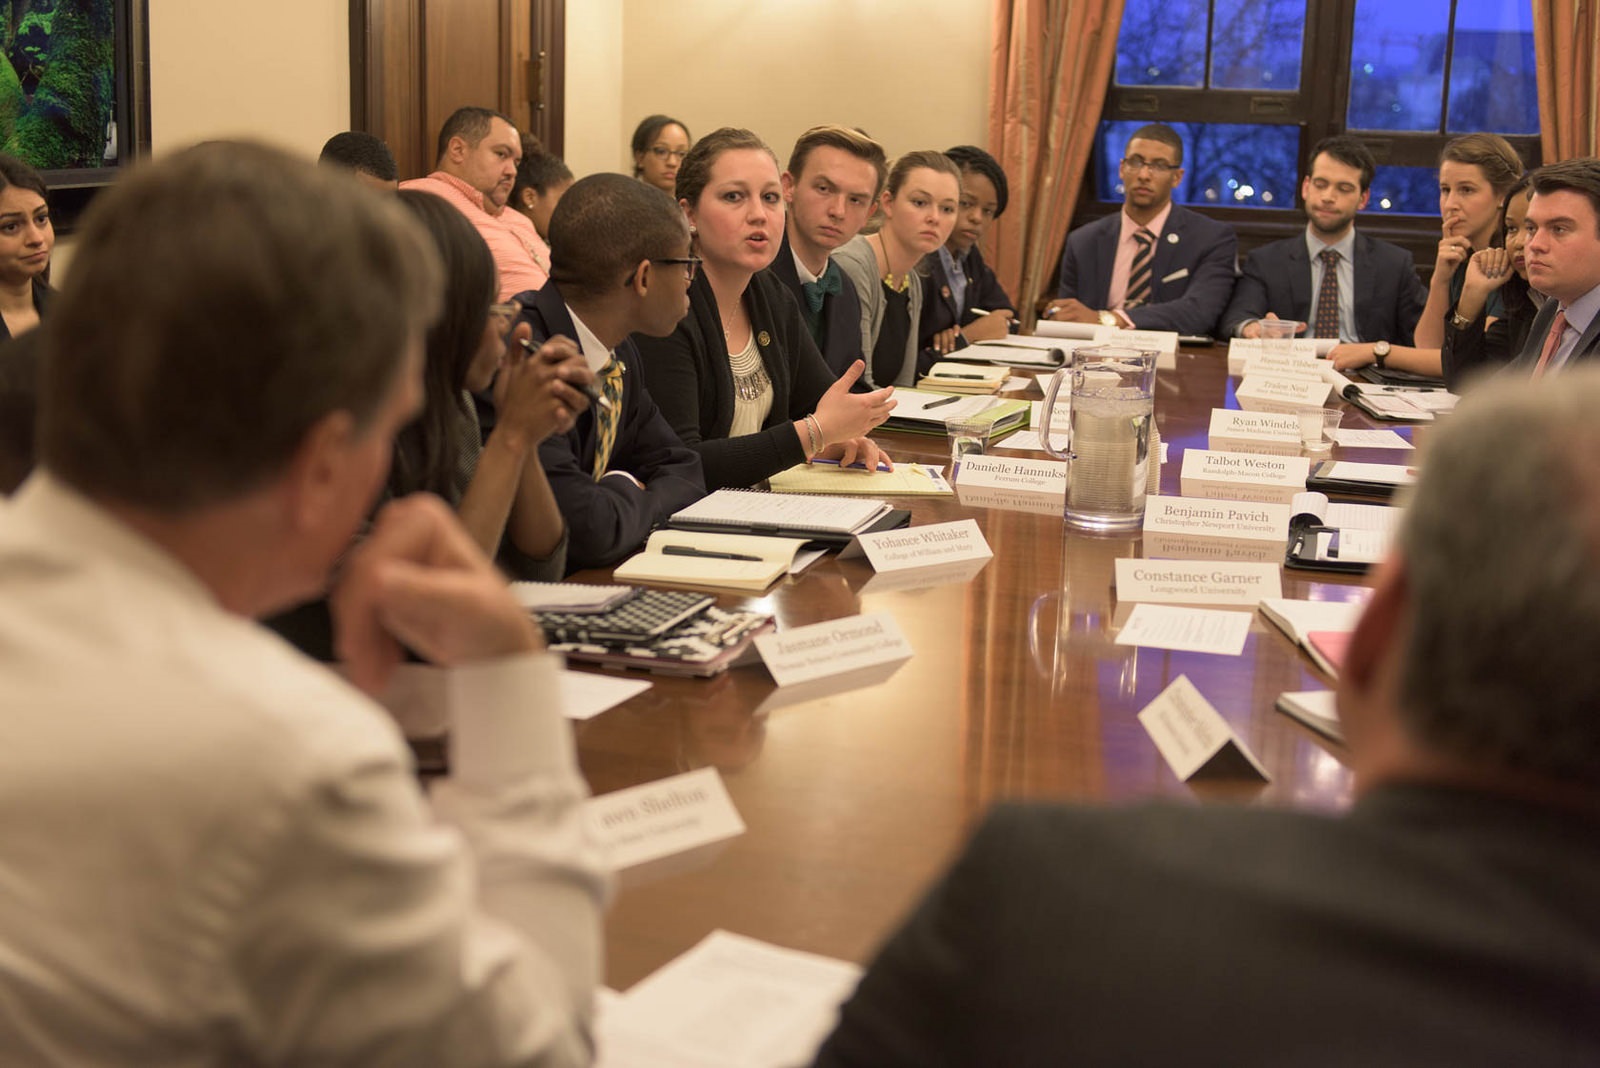 Sens. Kaine and Warner hold roundtable discussion on Higher Ed